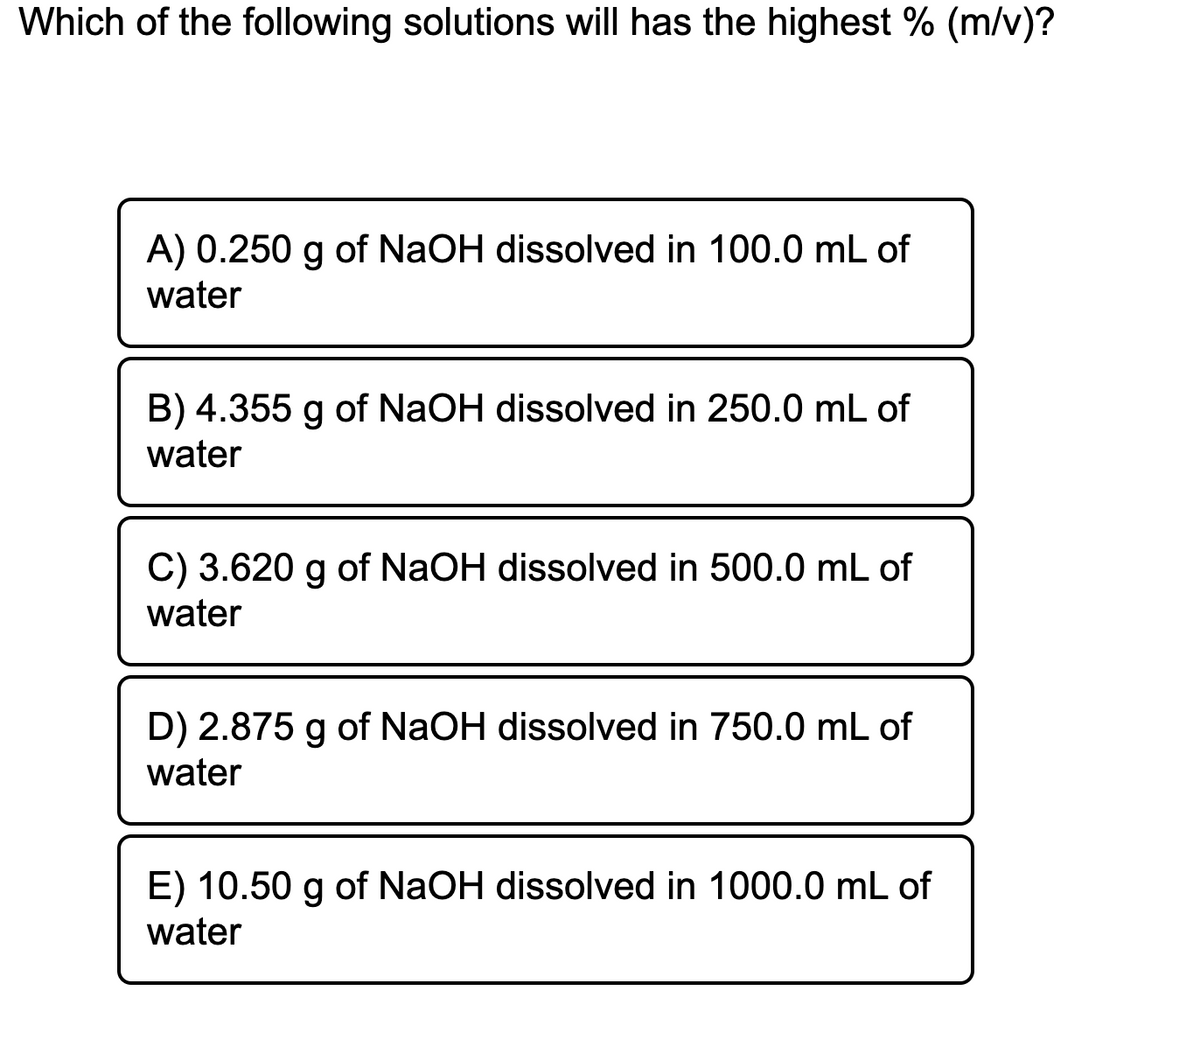 Which of the following solutions will has the highest % (m/v)?
A) 0.250 g of NaOH dissolved in 100.0 mL of
water
B) 4.355 g of NaOH dissolved in 250.0 mL of
water
C) 3.620 g of NaOH dissolved in 500.0 mL of
water
D) 2.875 g of NaOH dissolved in 750.0 mL of
water
E) 10.50 g of NaOH dissolved in 1000.0 mL of
water
